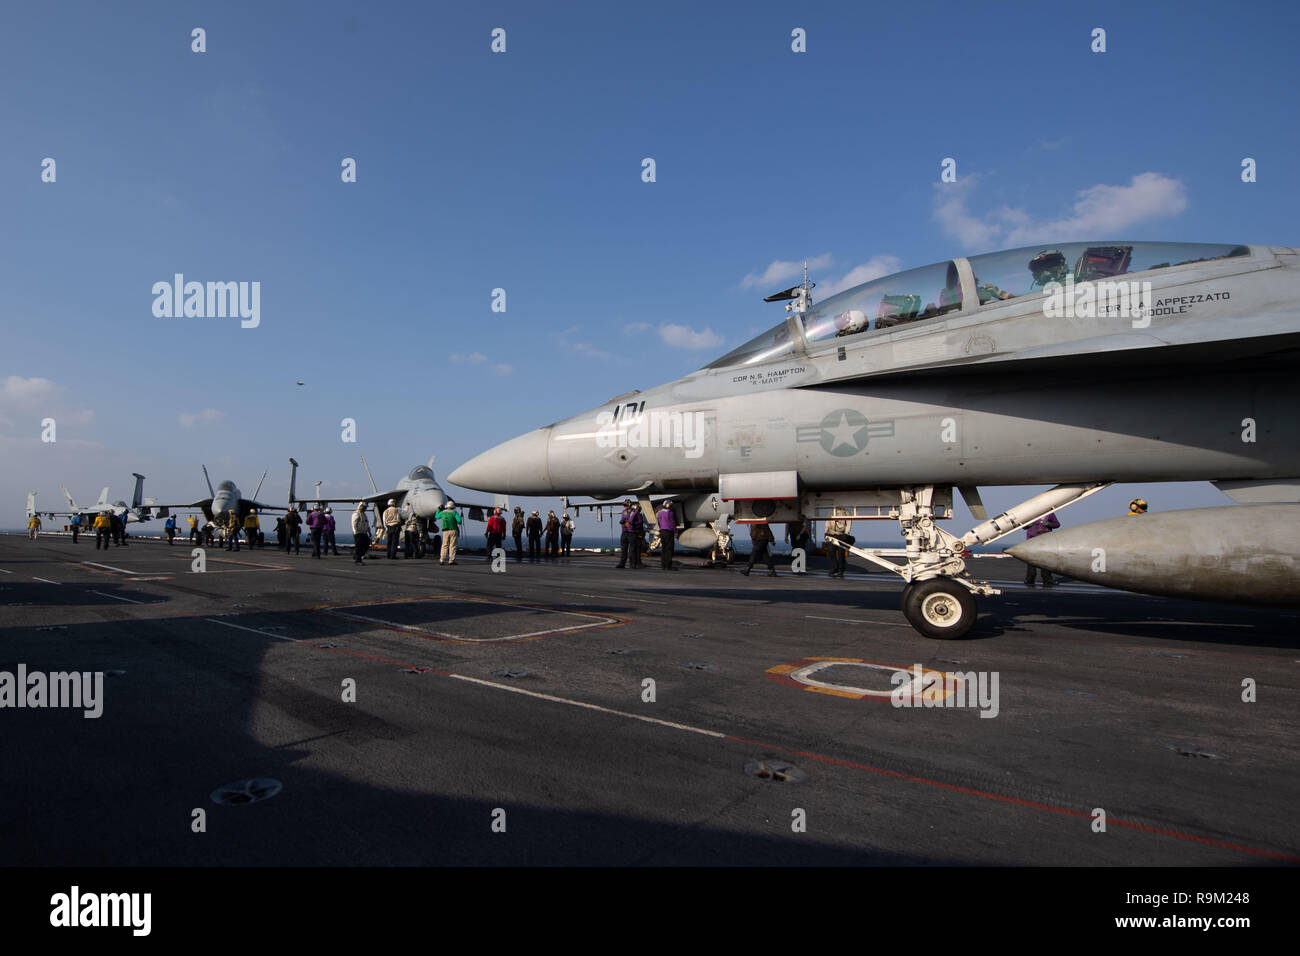 An F/A-18F Super Hornet, assigned to Strike Fighter Squadron (VFA) 41, taxies on the flight deck of the aircraft carrier USS John C. Stennis (CVN 74) in the Arabian Gulf, Dec. 22, 2018. The John C. Stennis Carrier Strike Group is deployed to the U.S. 5th Fleet area of operations in support of naval operations to ensure maritime stability and security in the Central Region, connecting the Mediterranean and the Pacific through the western Indian Ocean and three strategic choke points. (U.S. Navy photo by Mass Communications Specialist 3rd Class Grant G. Grady) Stock Photo